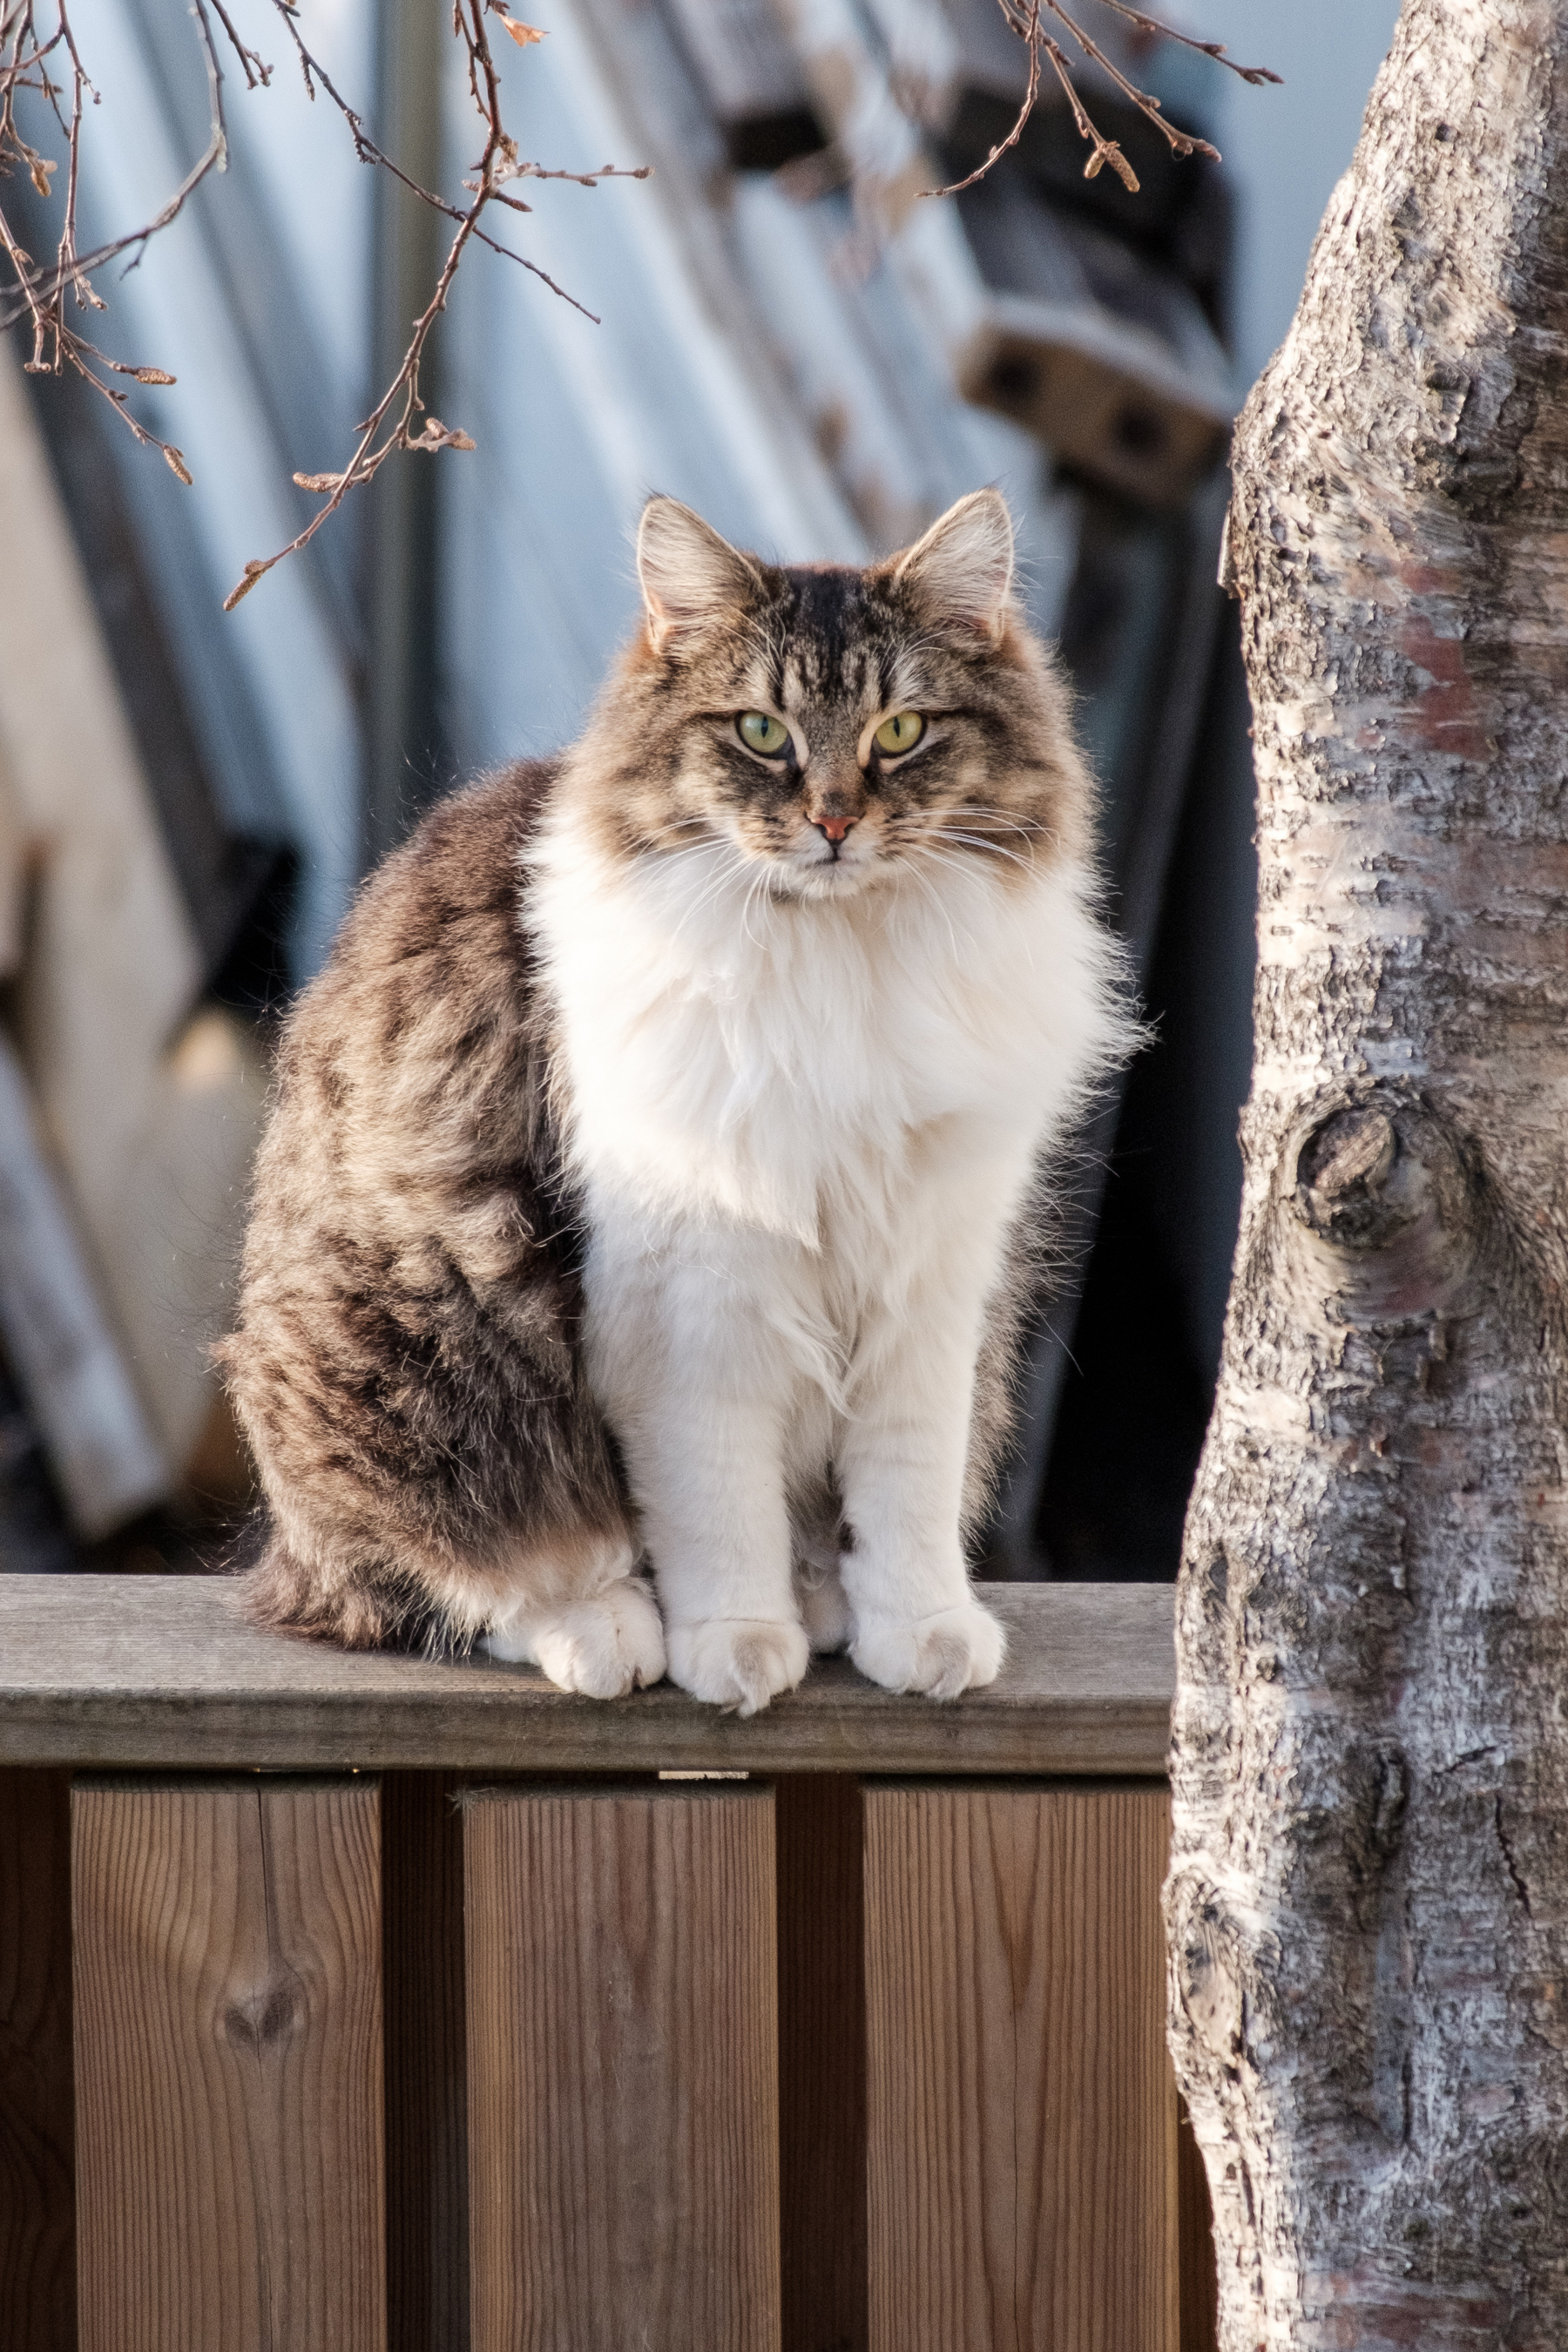 A very fluffy cat sits on a fence and stares into the camera.